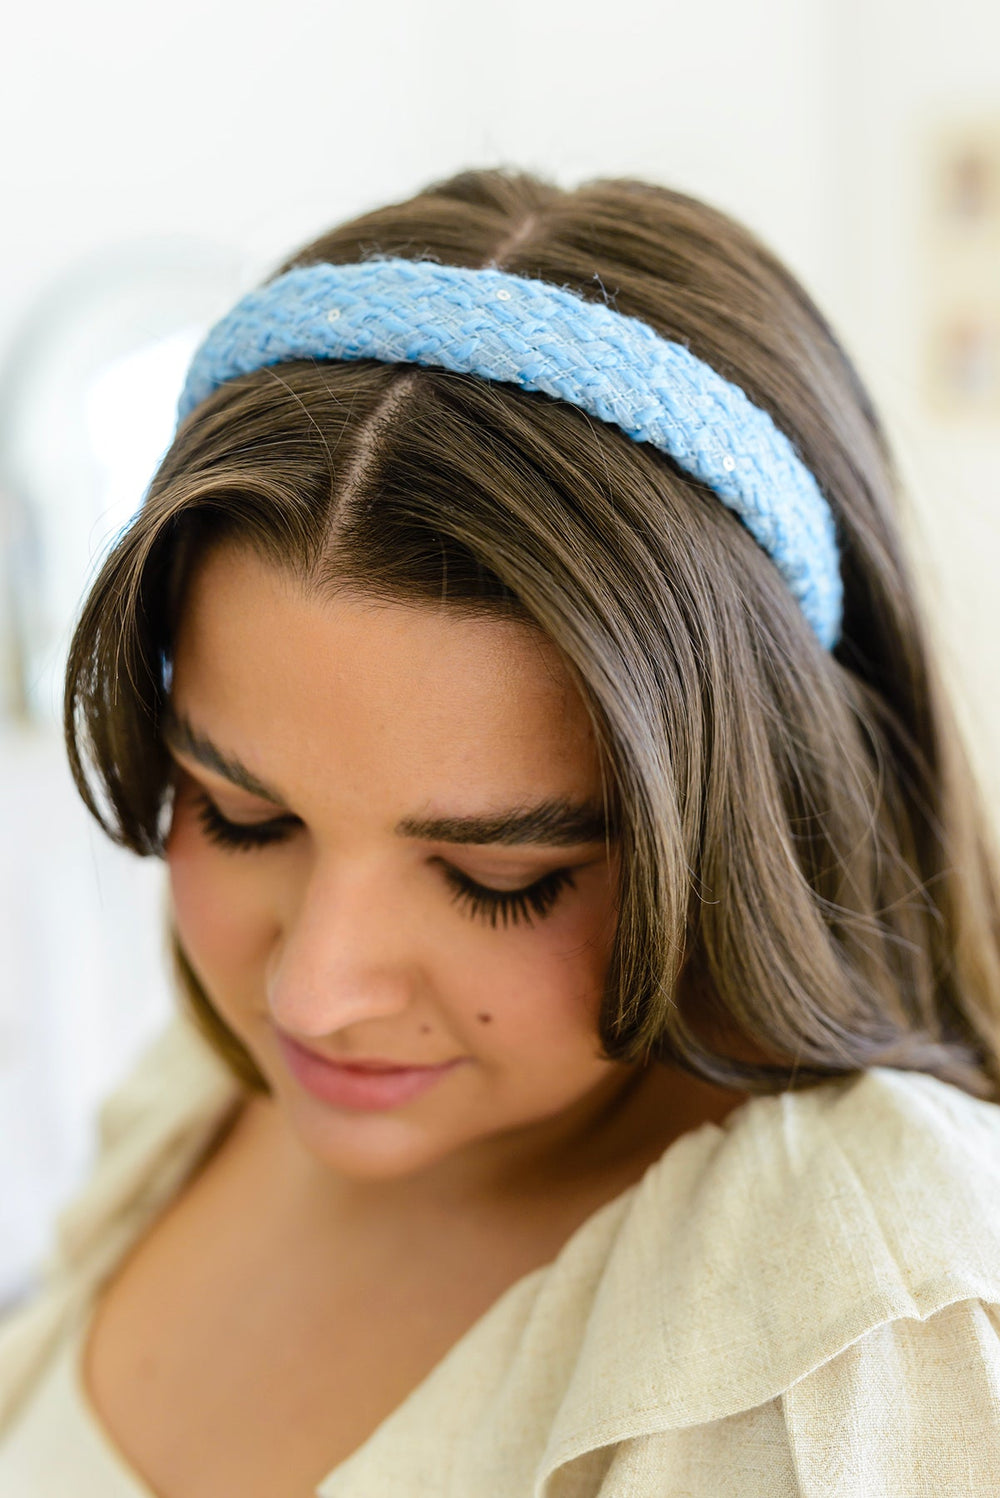 Natural Beauty Headband 3 pack-Headbands-Inspired by Justeen-Women's Clothing Boutique in Chicago, Illinois